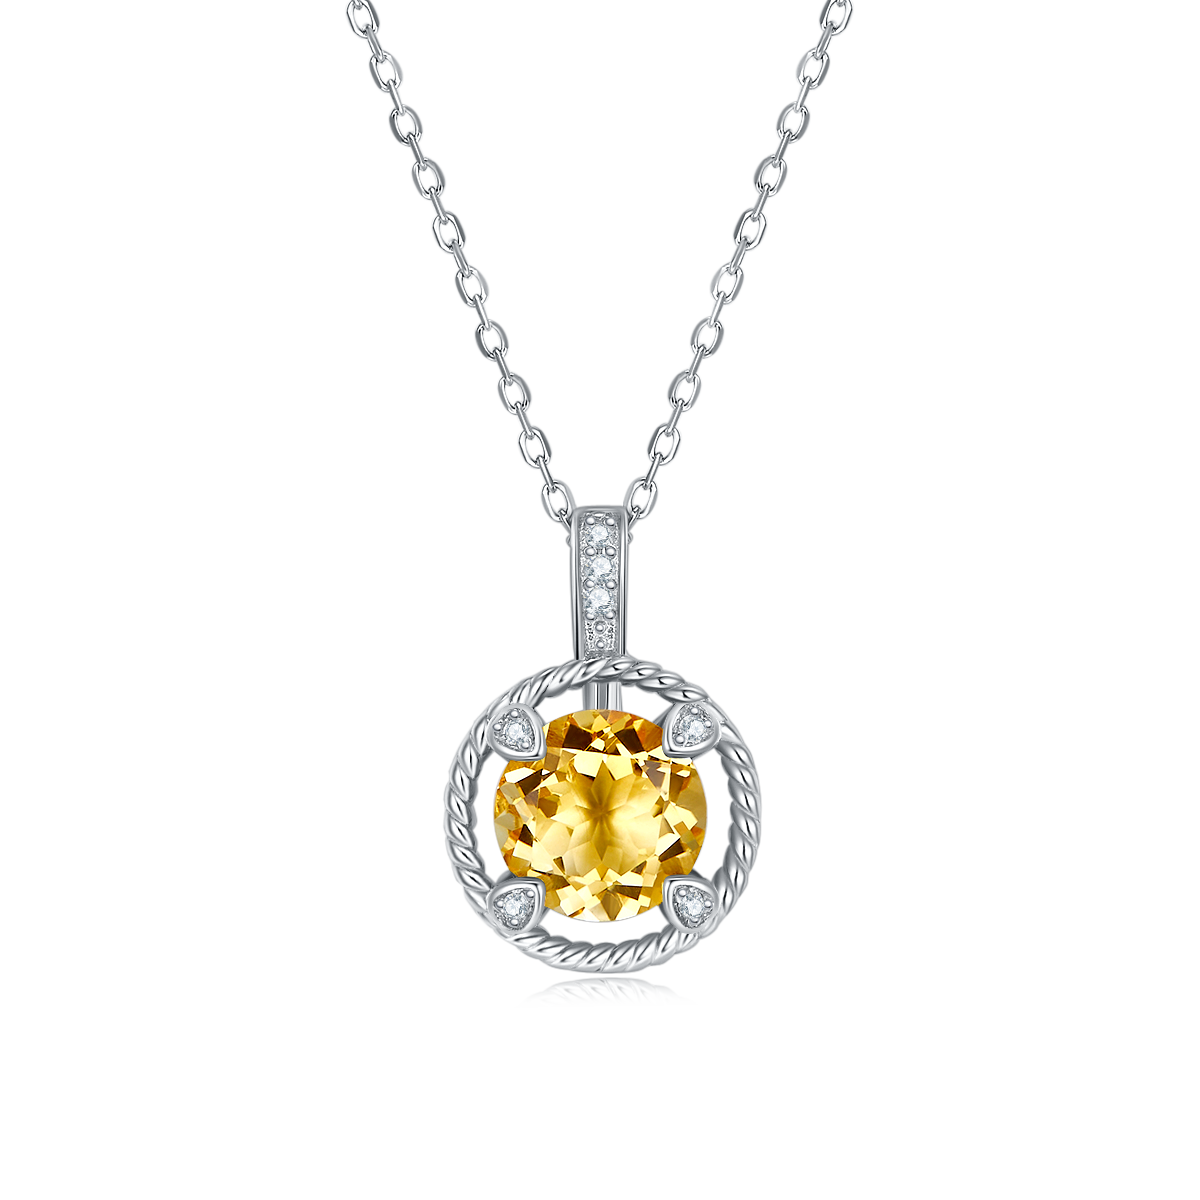 Round Cut Yellow Crystal Pendant Sterling Silver Necklace